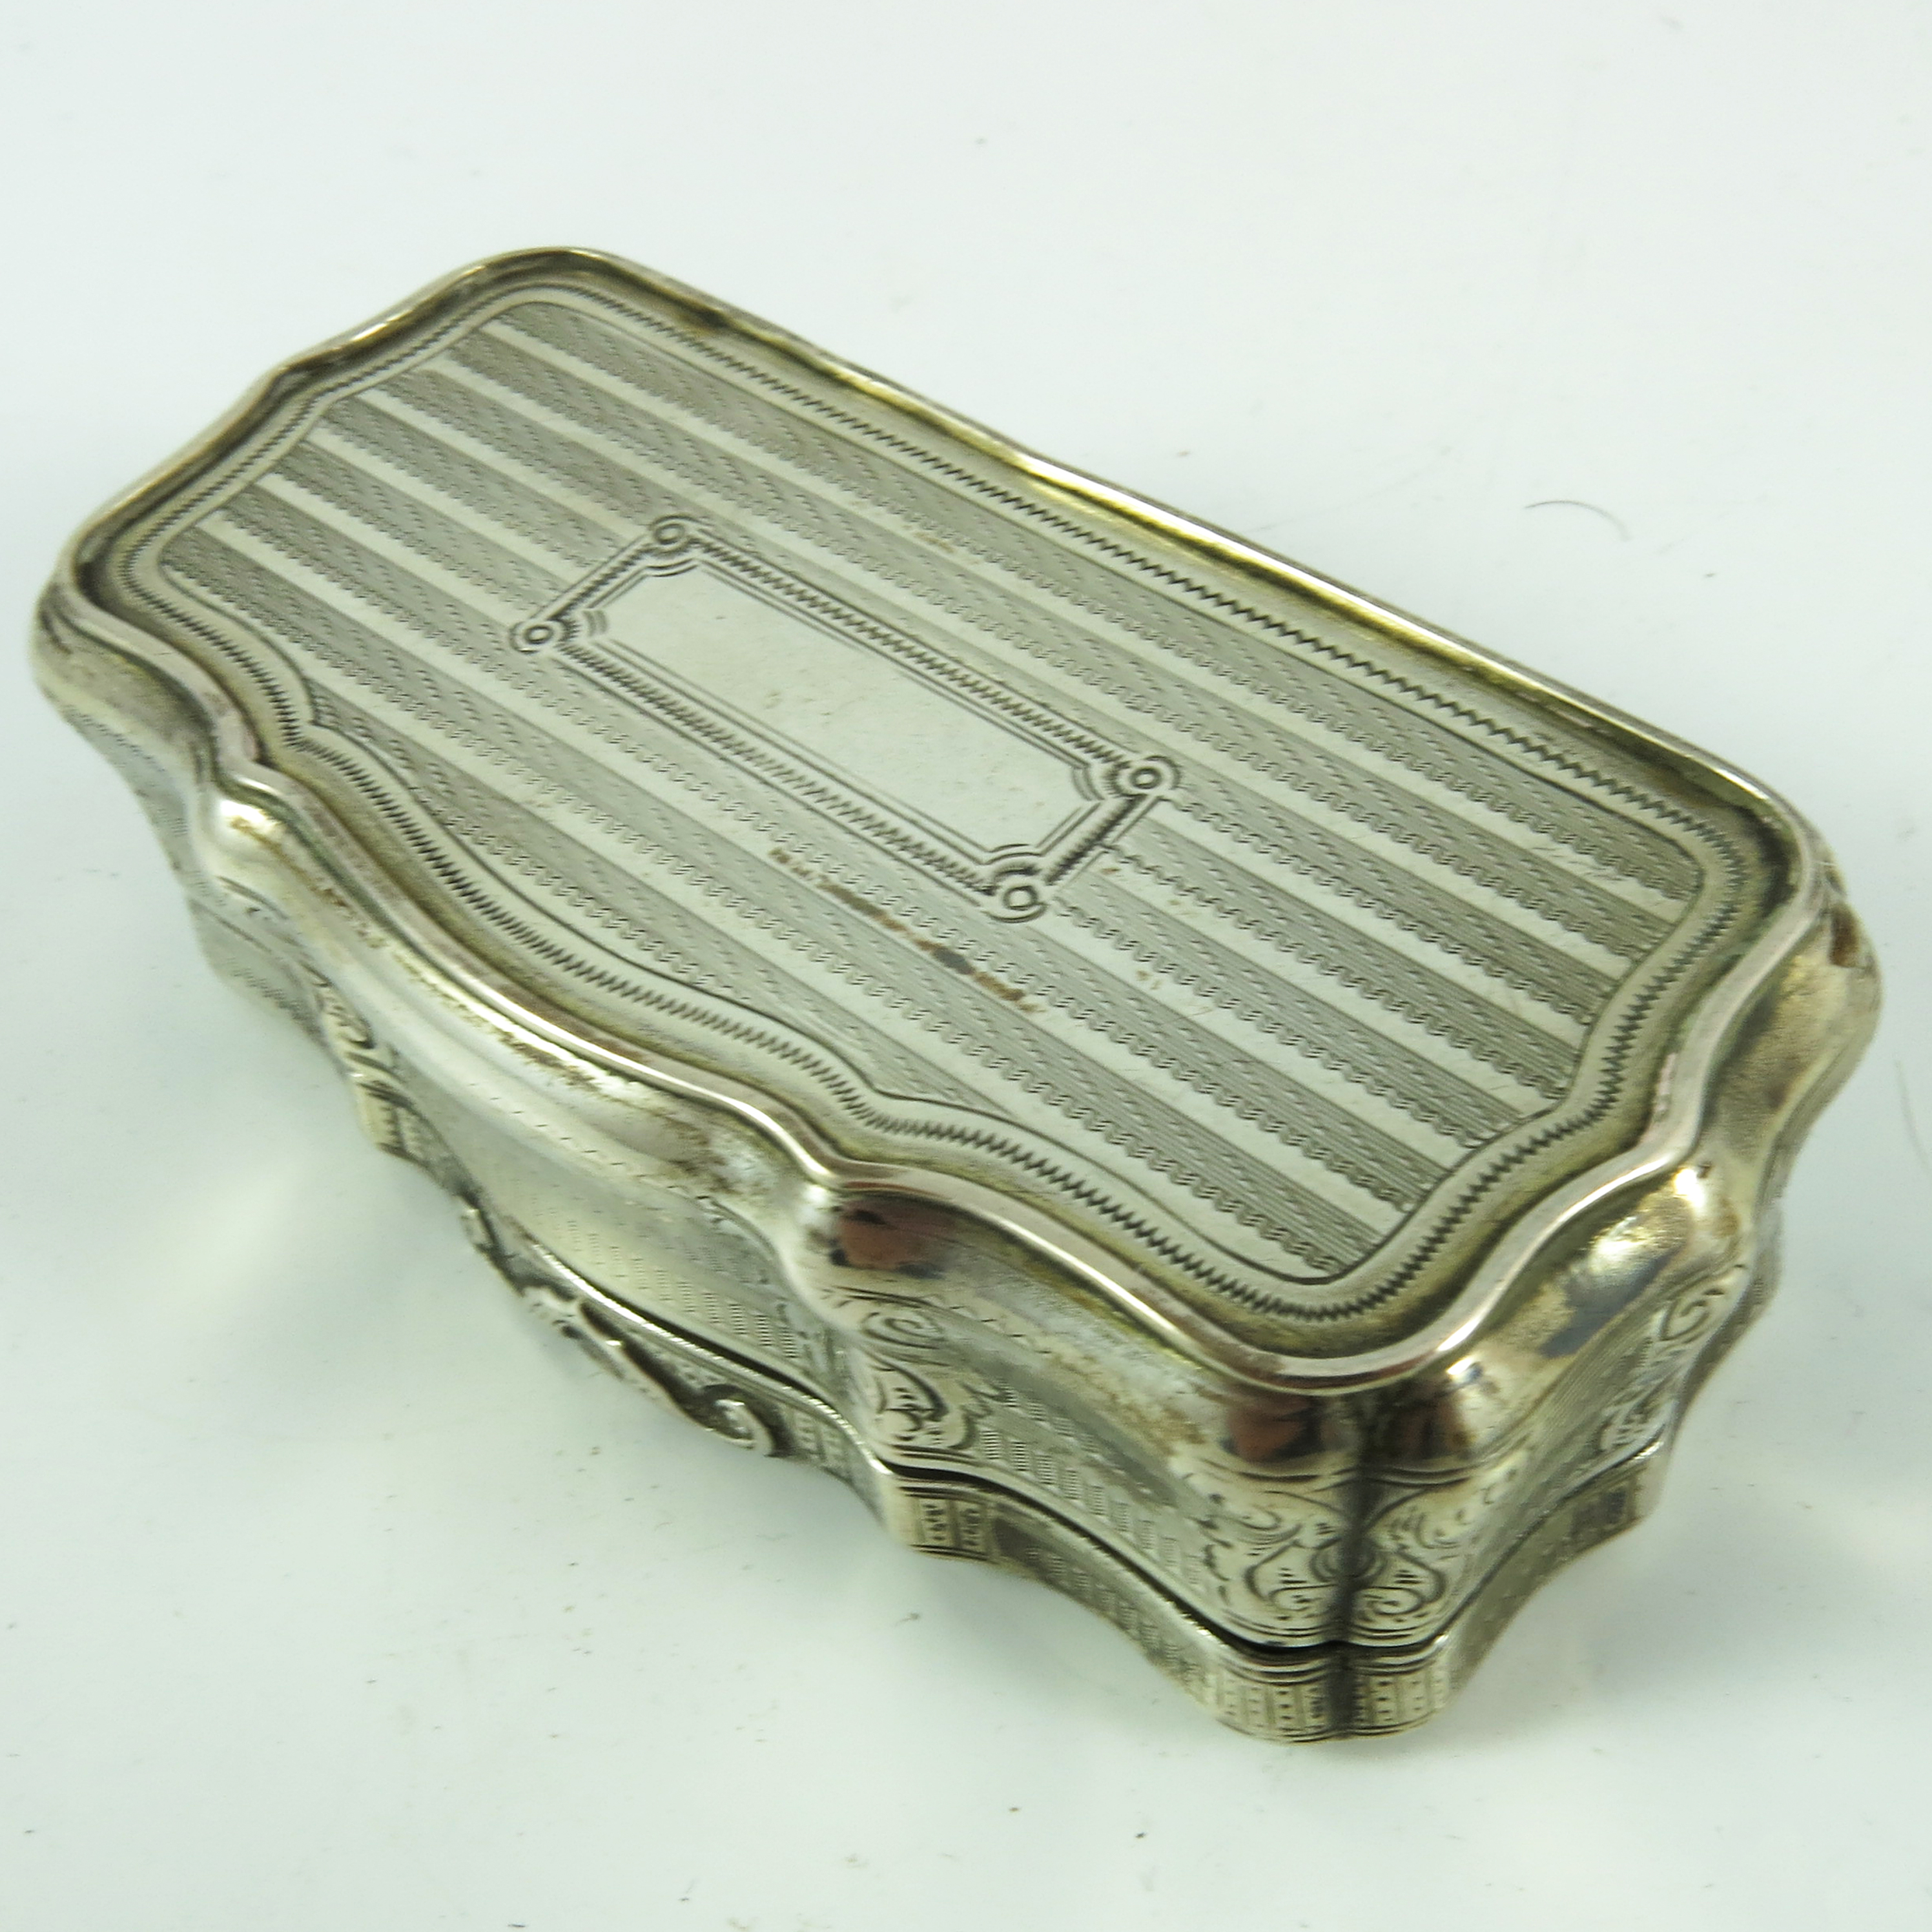 CONTINENTAL, POSSIBLY DUTCH, WHITE METAL TRINKET BOX WITH HINGED COVER - Image 6 of 6